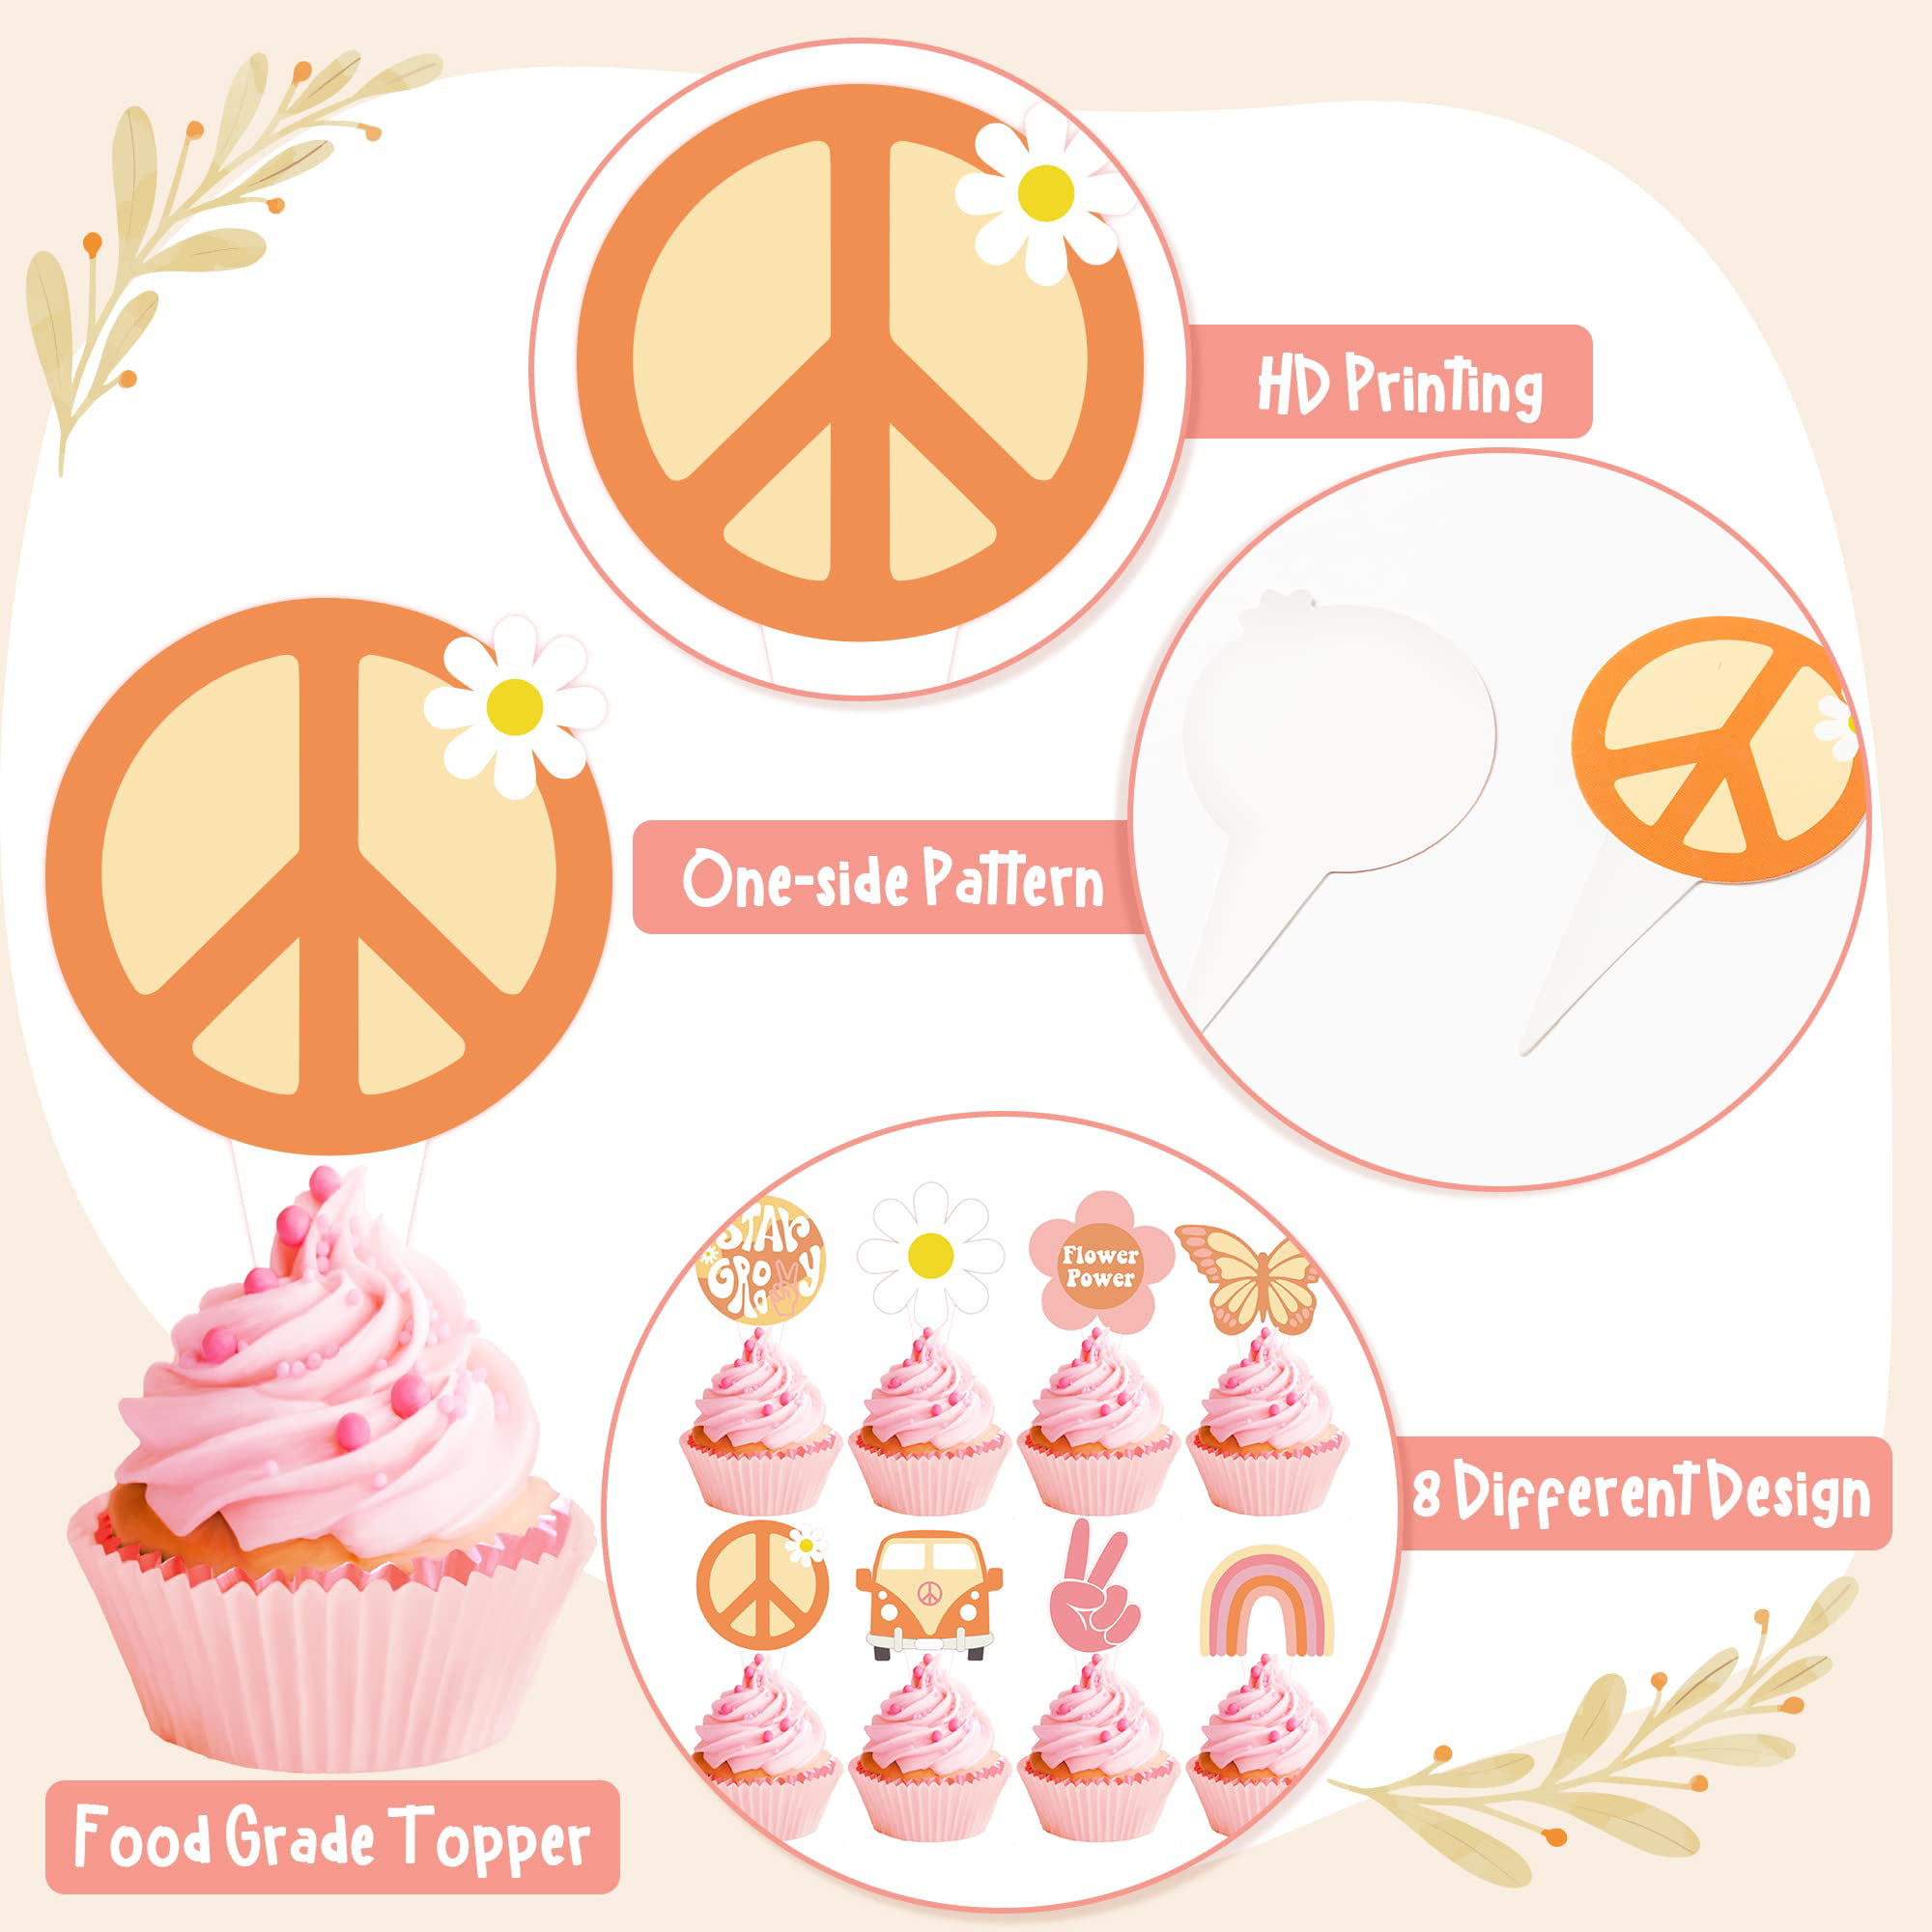  24 PCS Hand 2nd Birthday Cupcake Toppers Glitter Peacekeeper  Cupcake Picks Peace Sign Cake Decorations for Peace Theme 2nd Birthday  Anniversary Retro Party Supplies Gold : Grocery & Gourmet Food